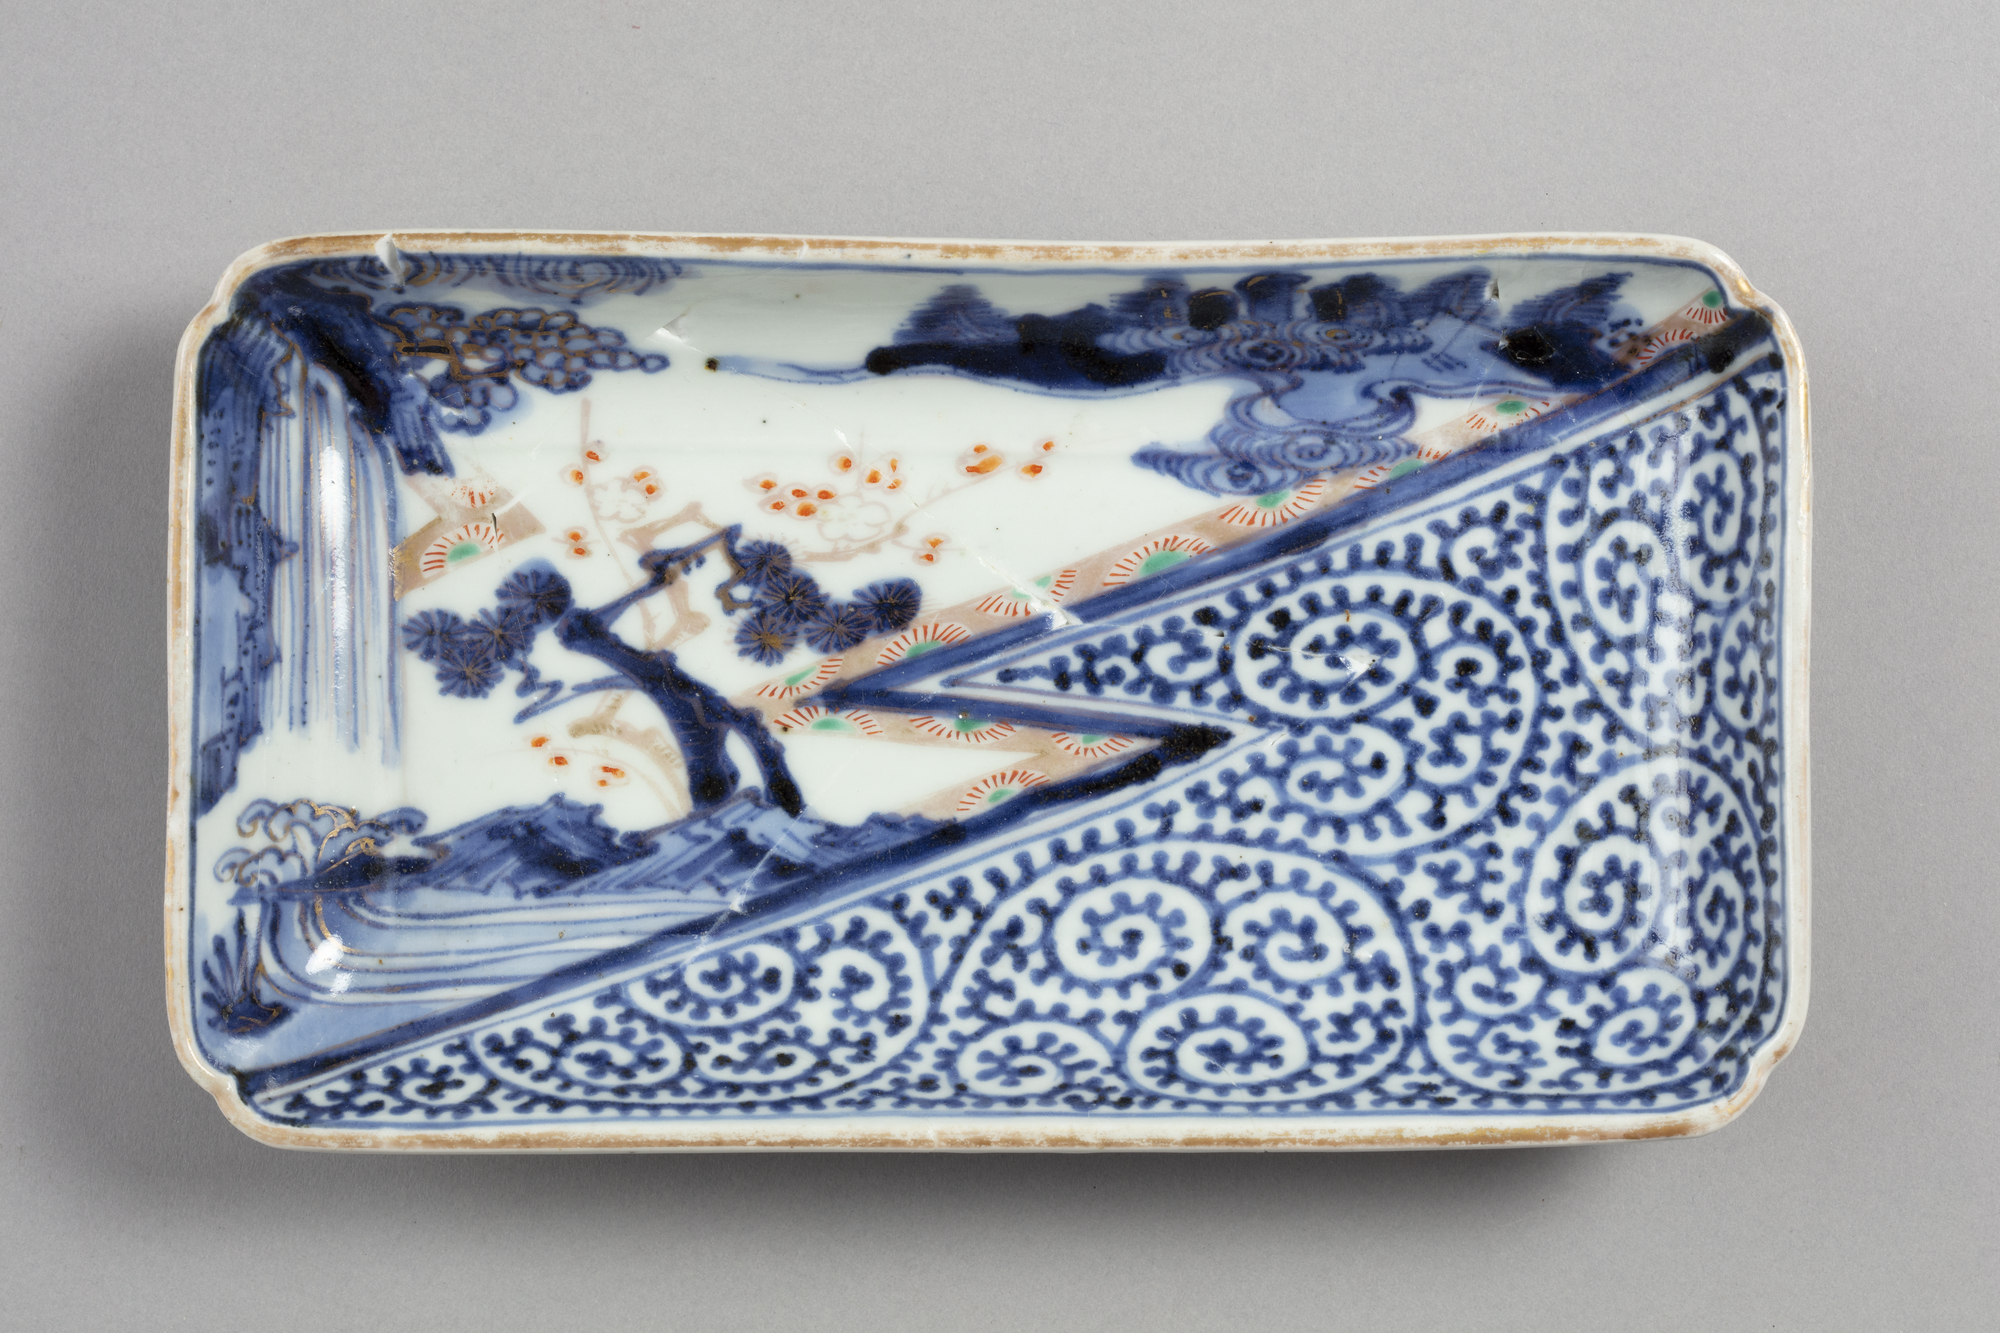 Rectangular dish with octopus scroll pattern and tree design